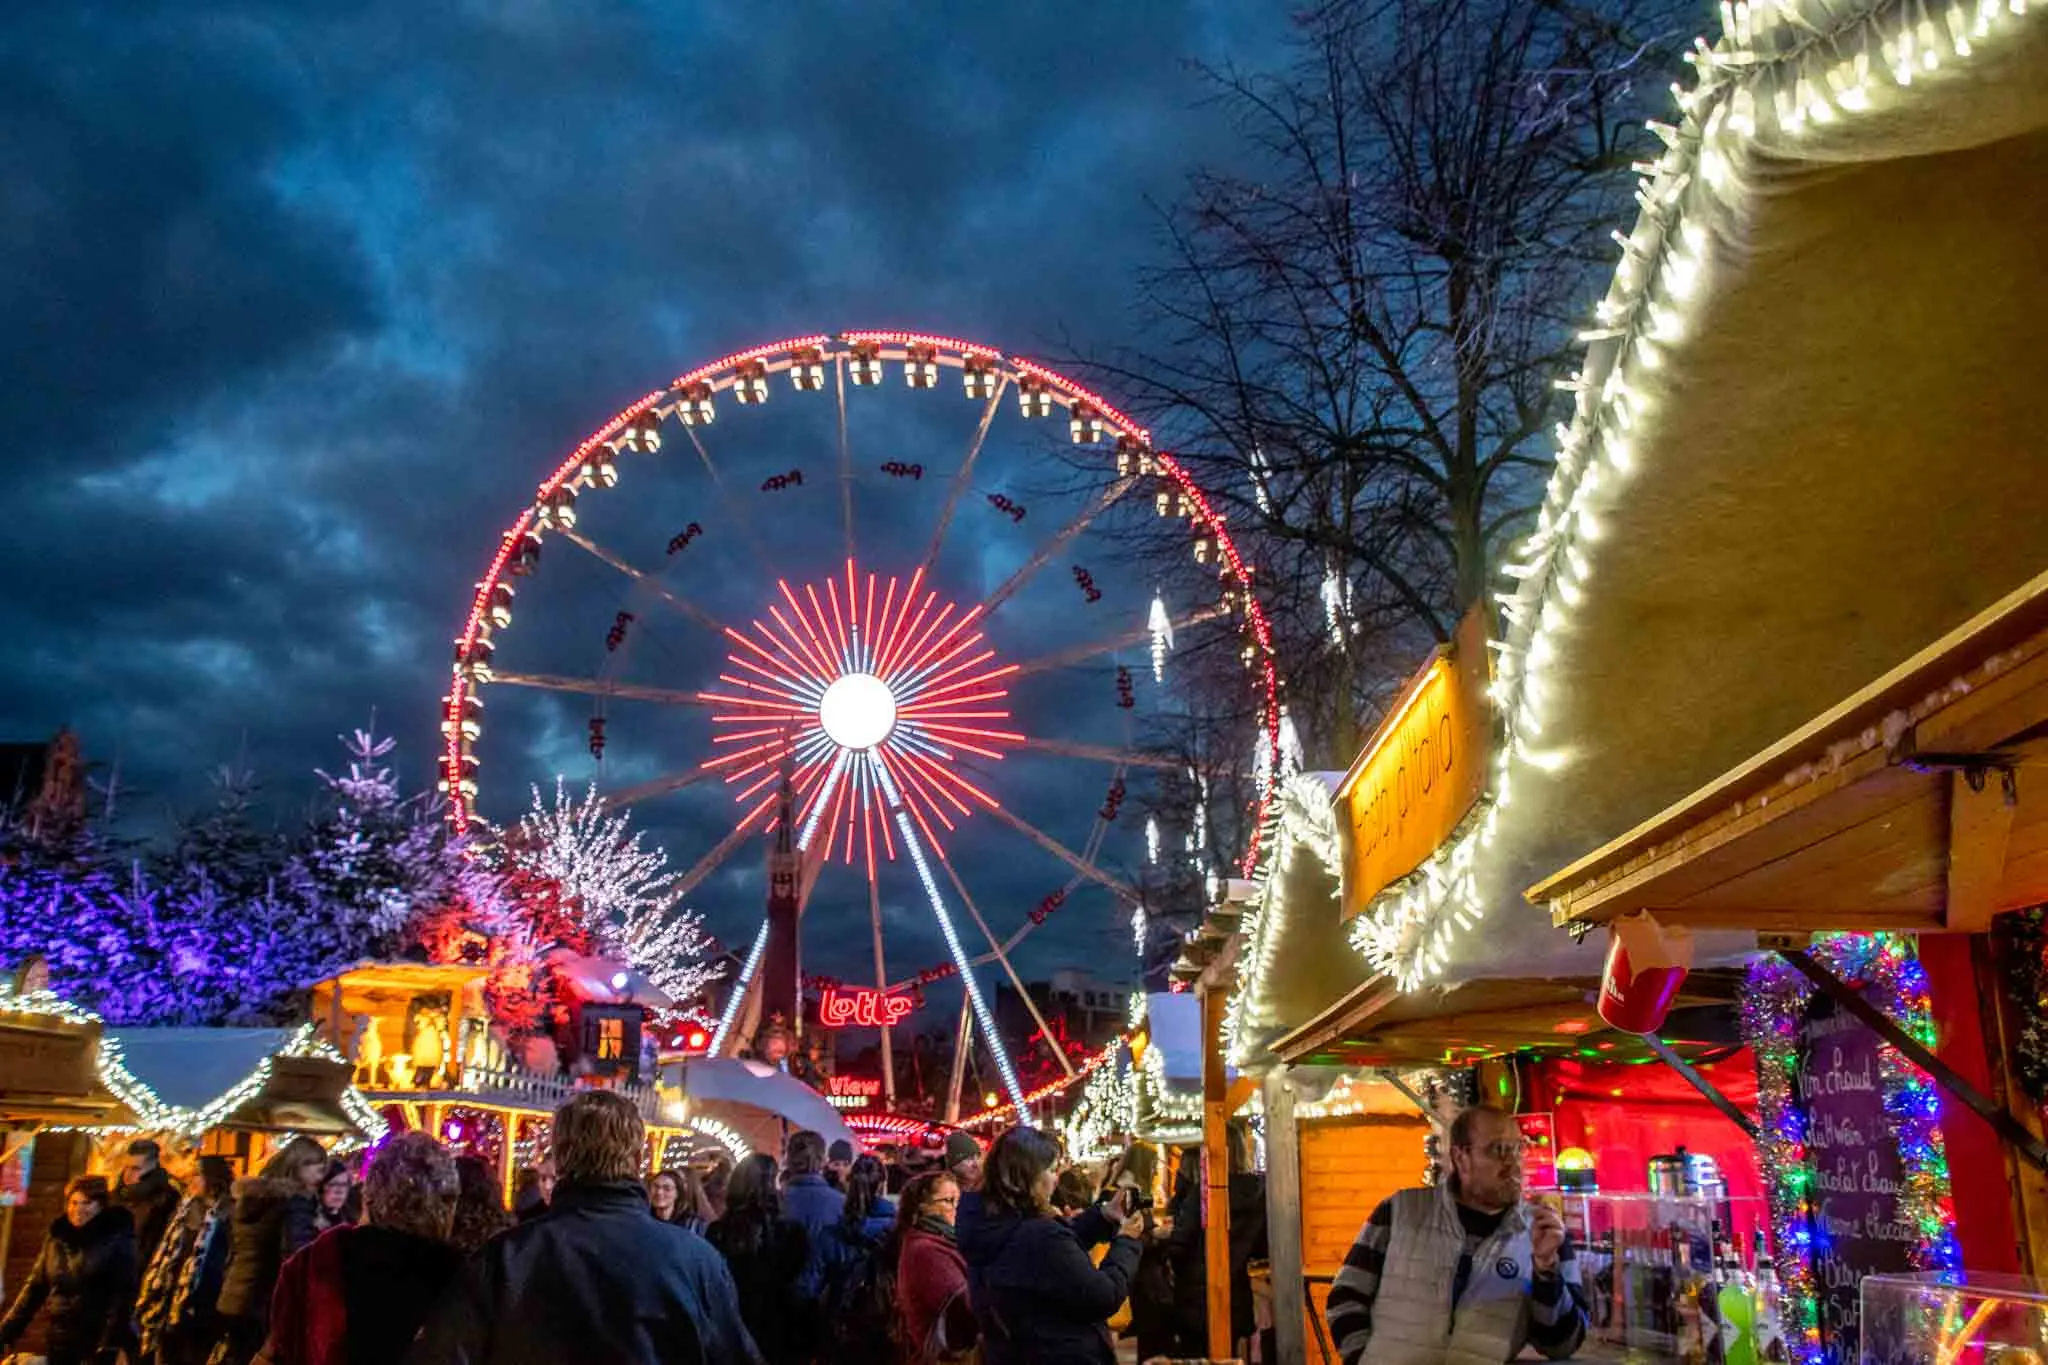 Ferris wheel, vendors, and shoppers at Christmas market